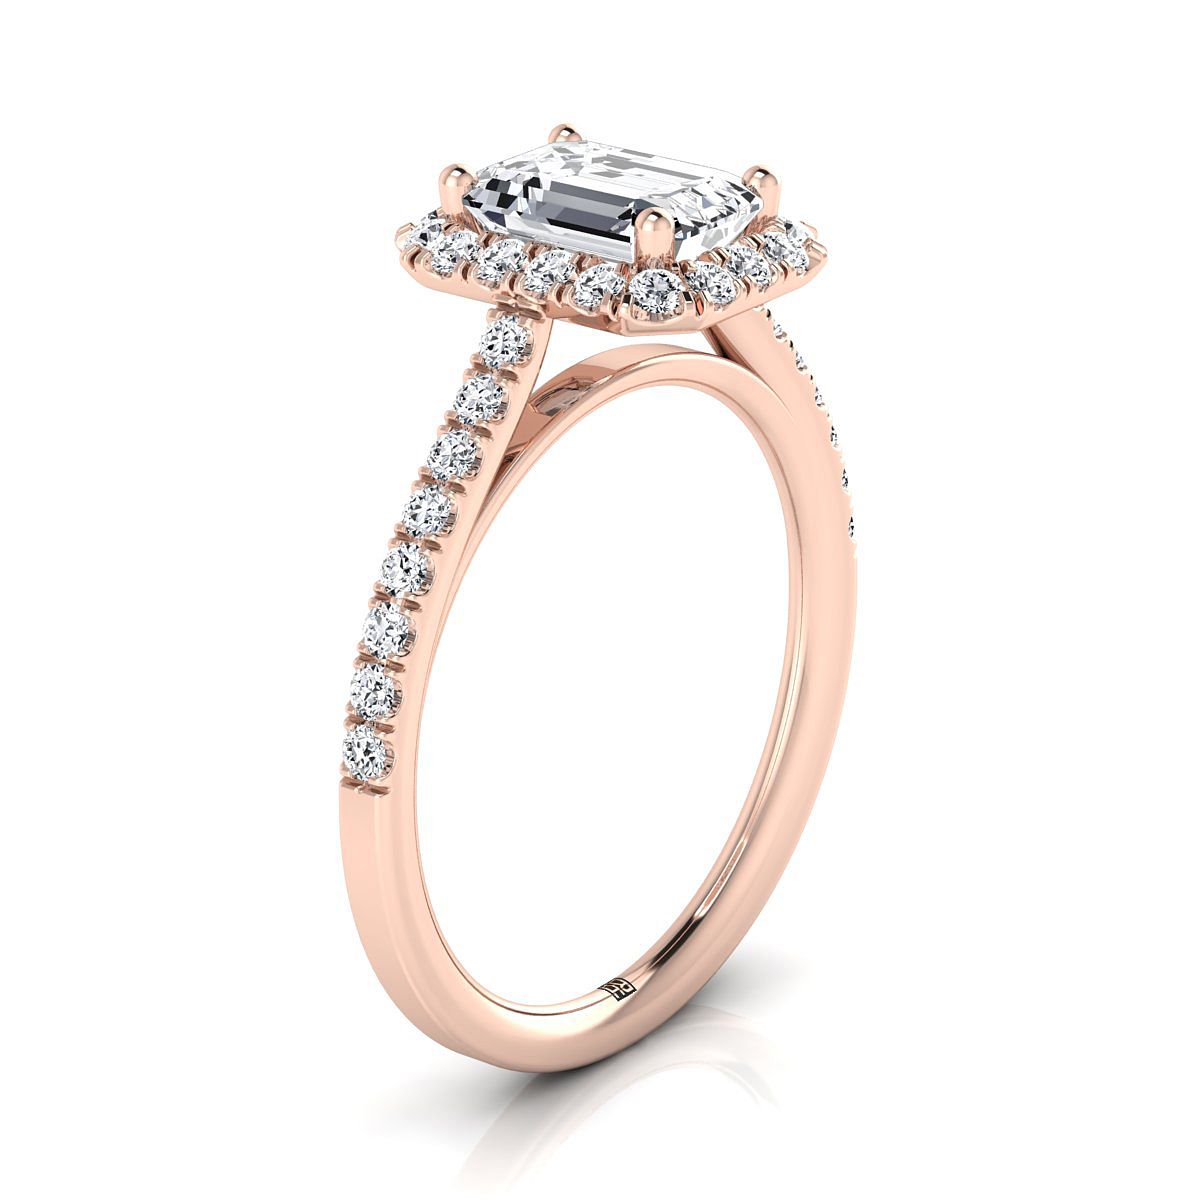 14K Rose Gold Emerald Cut Diamond Petite Halo French Pave Engagement Ring -3/8ctw